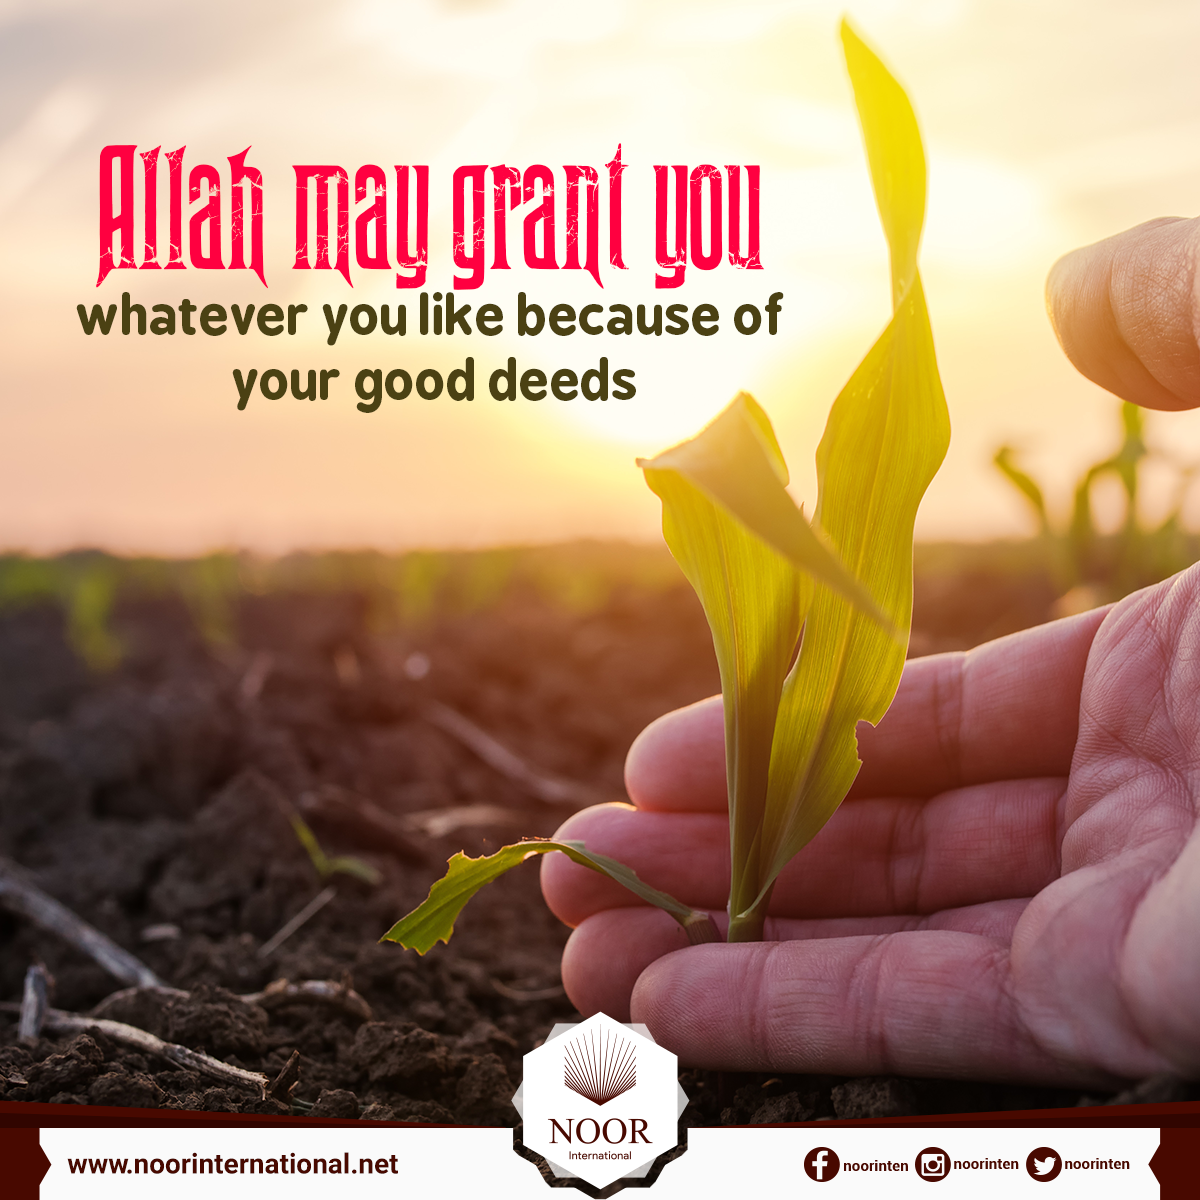 Allah may grant you whatever you like because of your good deeds